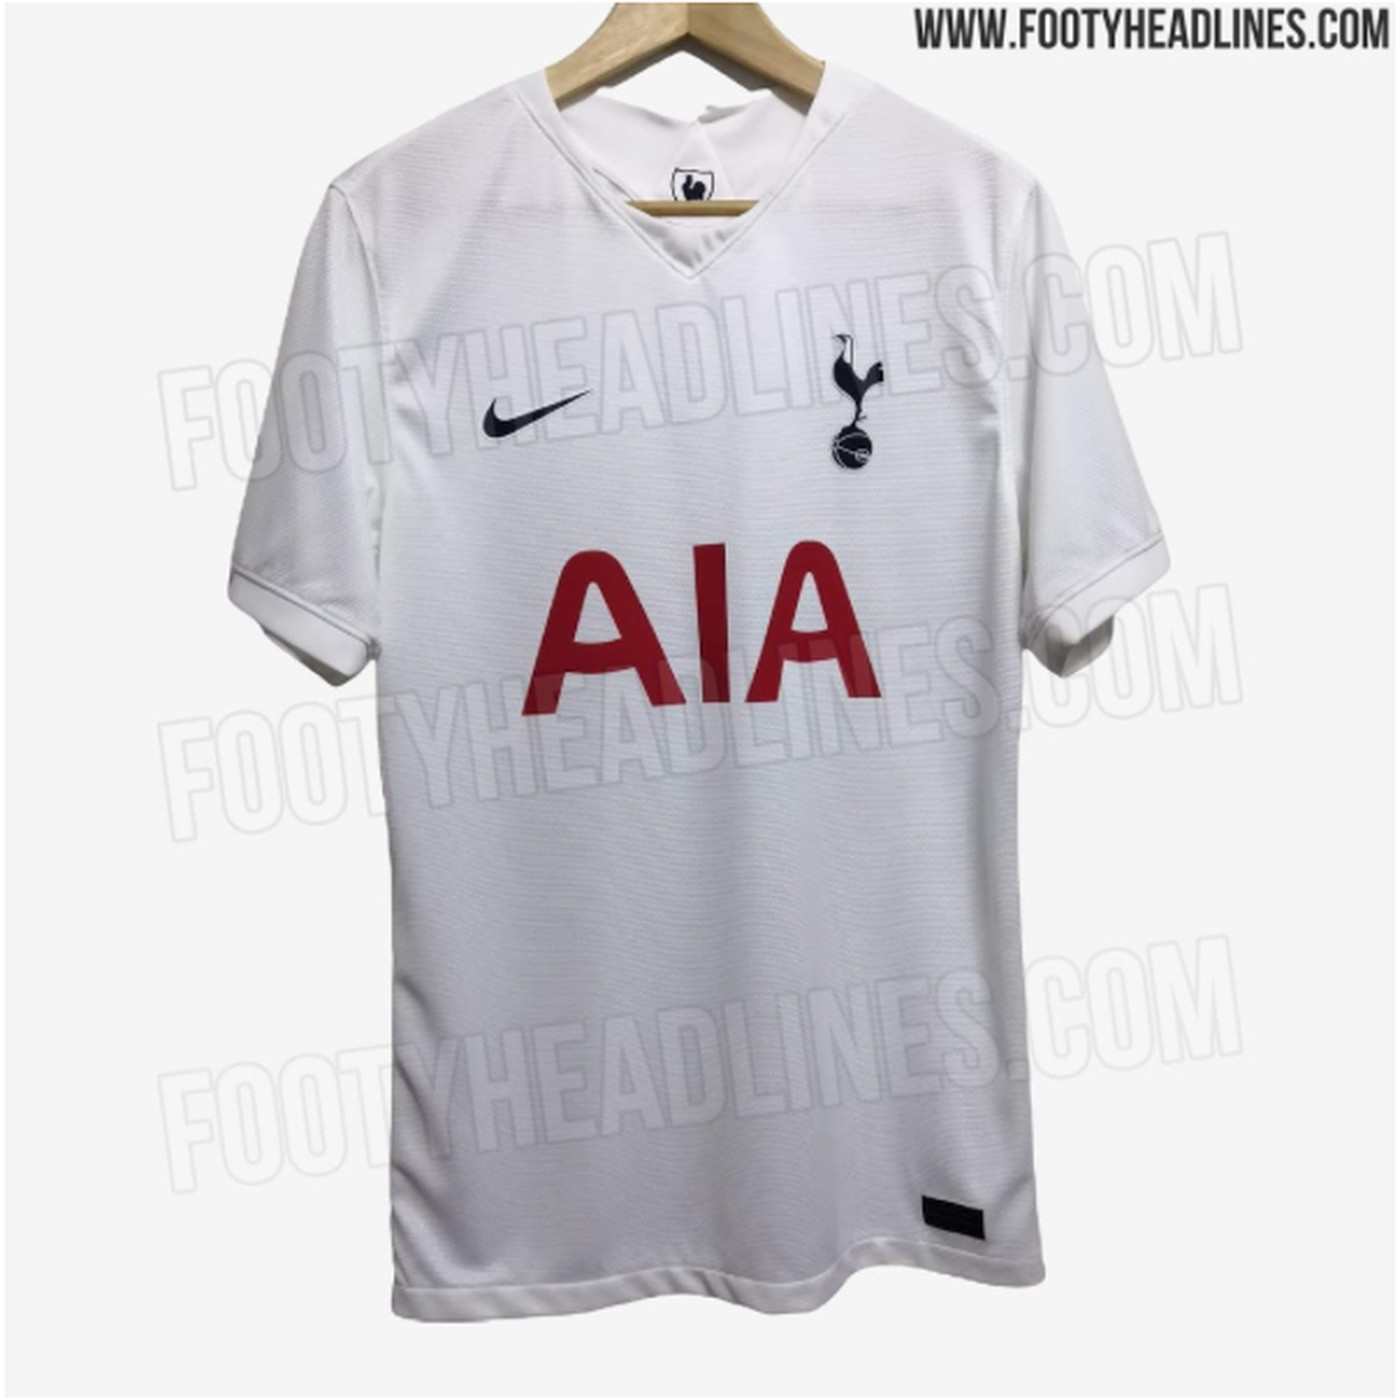 Tottenham S 2021 22 Home Kit Has Leaked On The Internet And Traditionalist Fans Will Love It Cartilage Free Captain